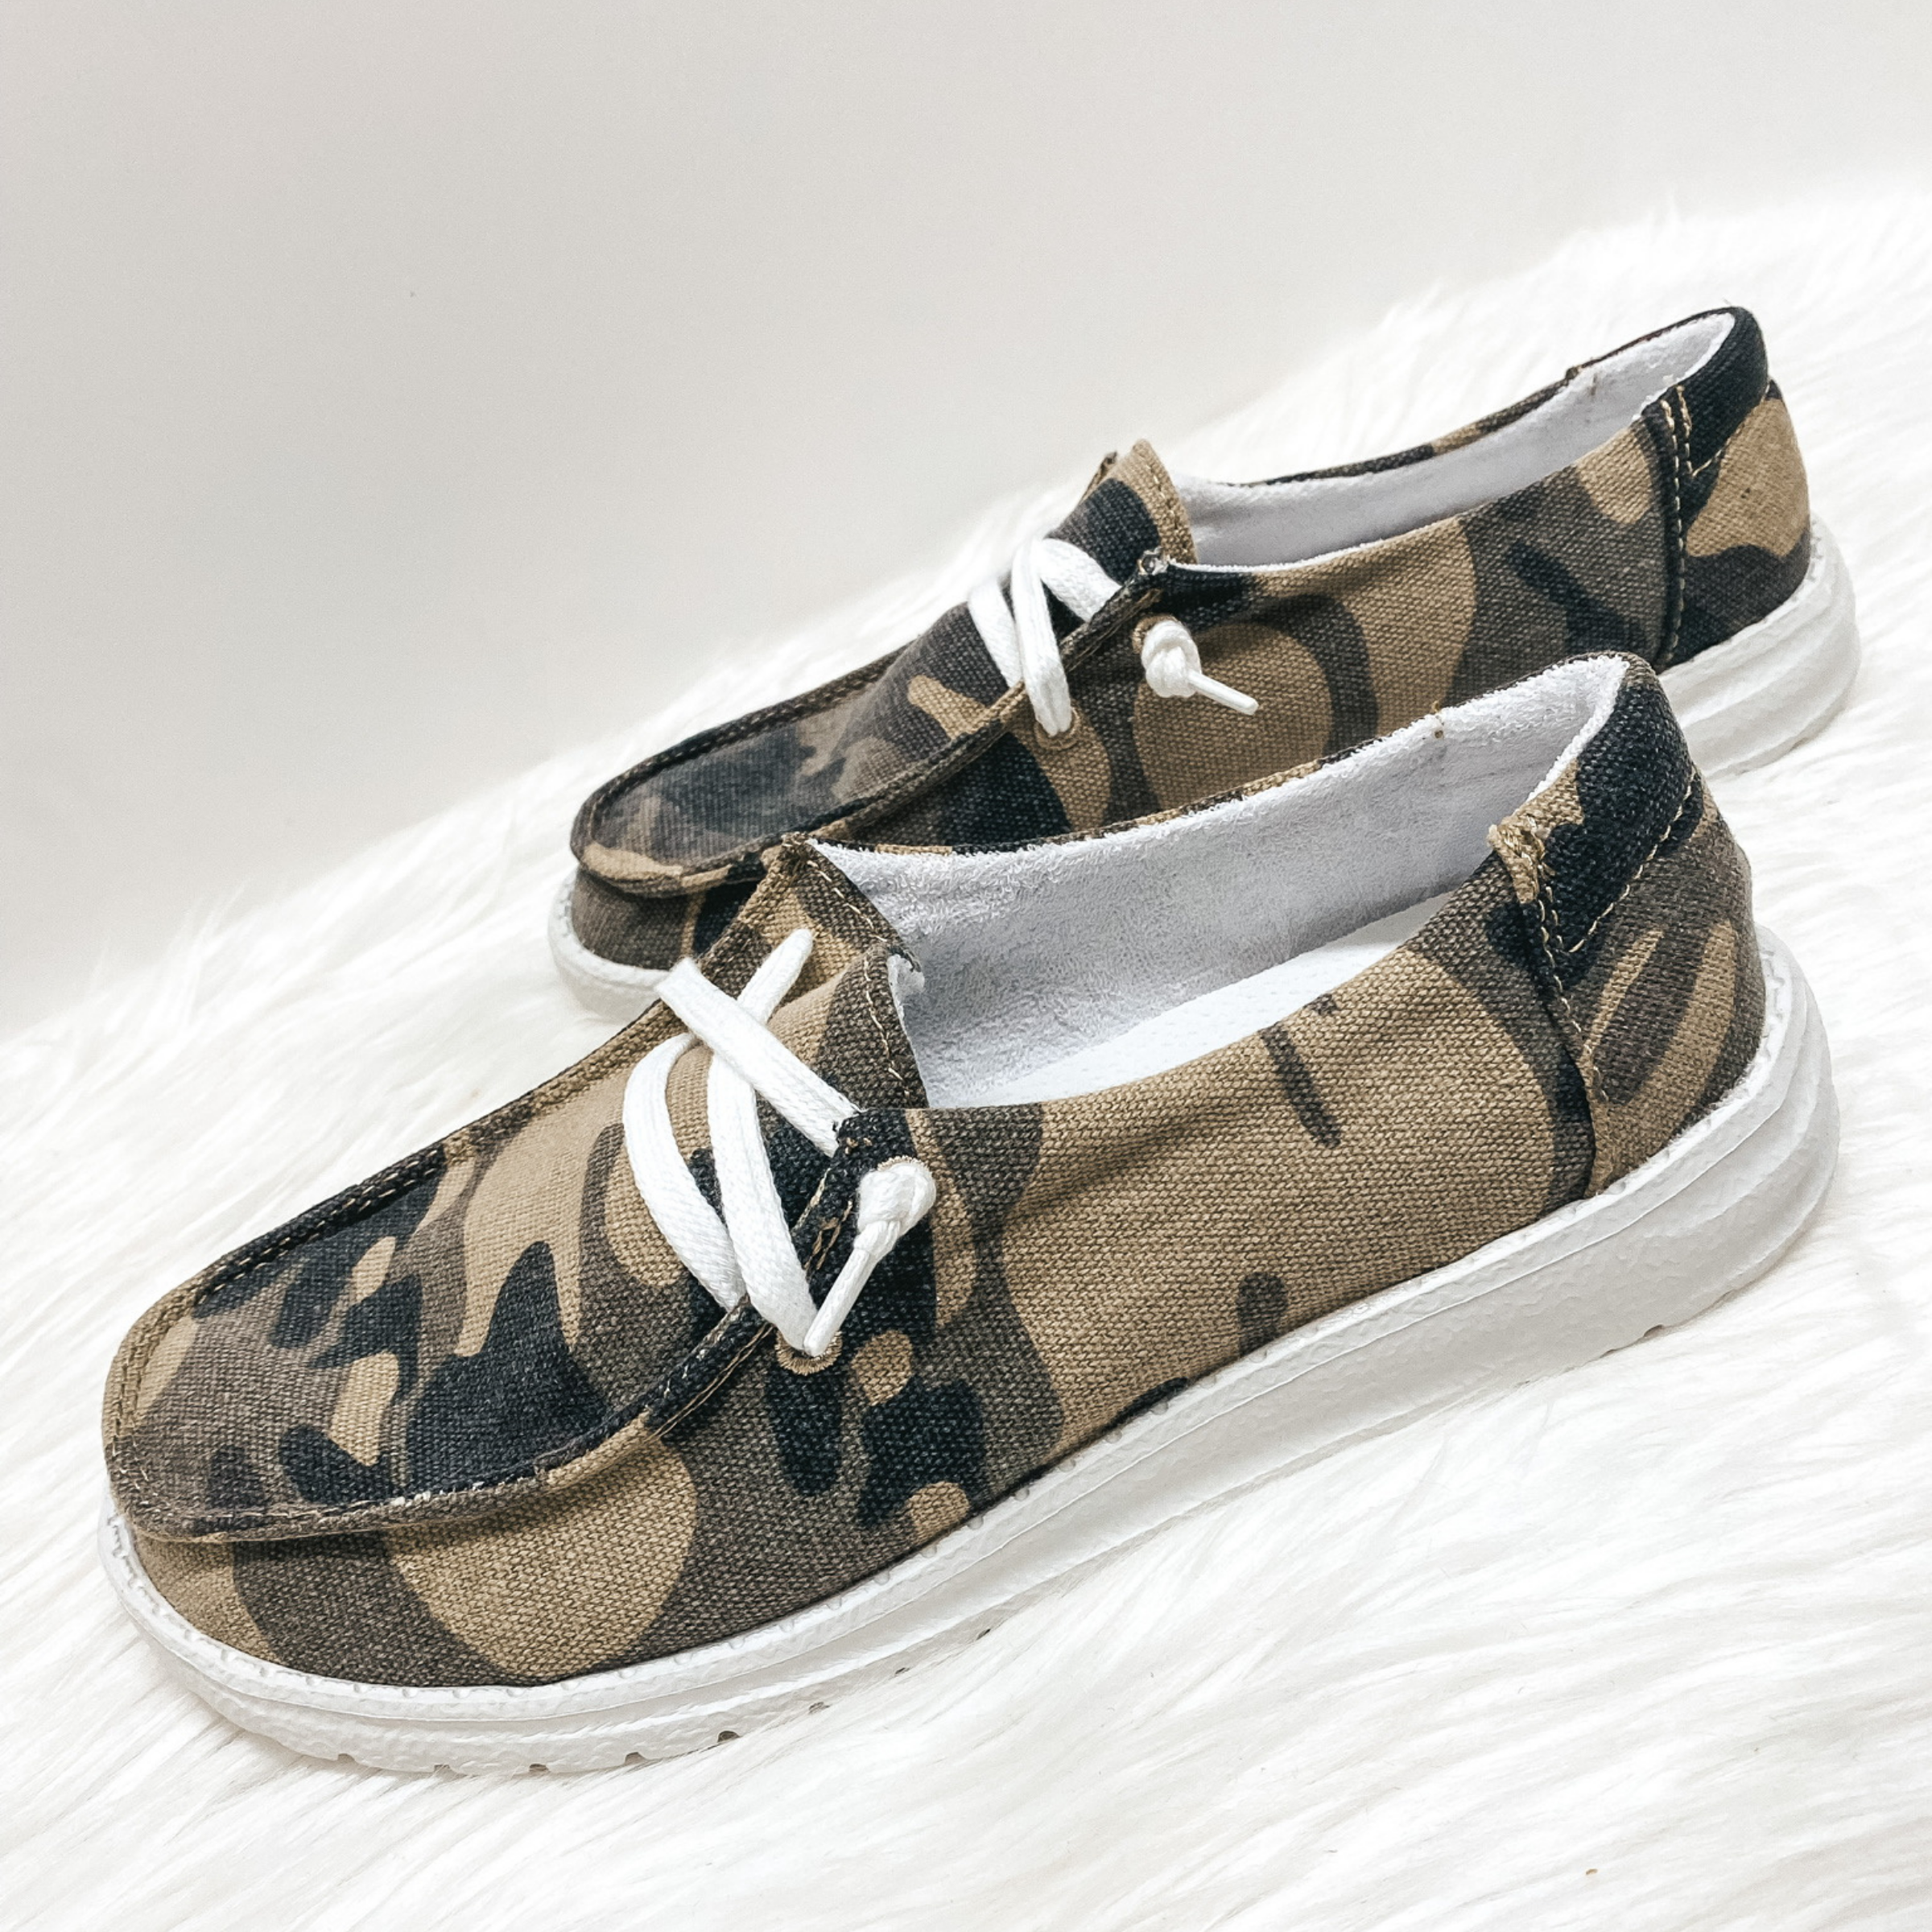 Very G | Have To Run Slip On Loafers with Laces in Camouflage - Giddy Up Glamour Boutique